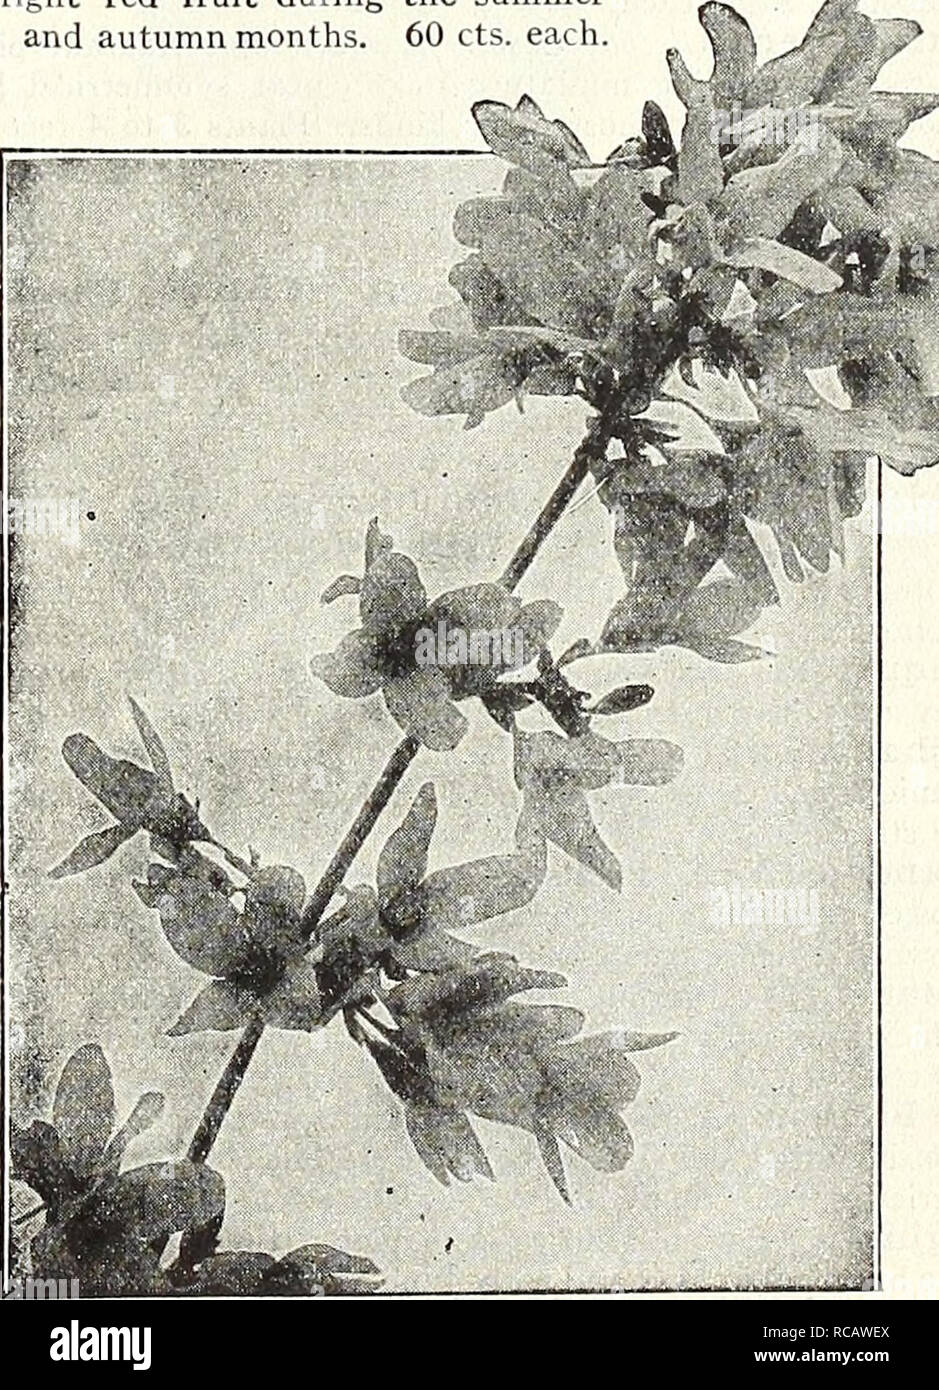 . Dreer's autumn catalogue 1931. Bulbs (Plants) Catalogs; Flowers Seeds Catalogs; Gardening Equipment and supplies Catalogs; Nurseries (Horticulture) Catalogs; Vegetables Seeds Catalogs. Deutzia Lemoinei ESeagOtlS (Japanese Oleaster) Longipes. A very desin ble, nearly evergreen Shrub of medium height, with light foliage, which is silvered on the under surface. The abundant crop of orange-colored fruit is a very attractive feature during the summer. 75 cts. each. Elsholtzia (Mintshrub) Stauntoni. Its.late flowering, September and October, makes this a particular^ valuable Shrub. It grows about  Stock Photo